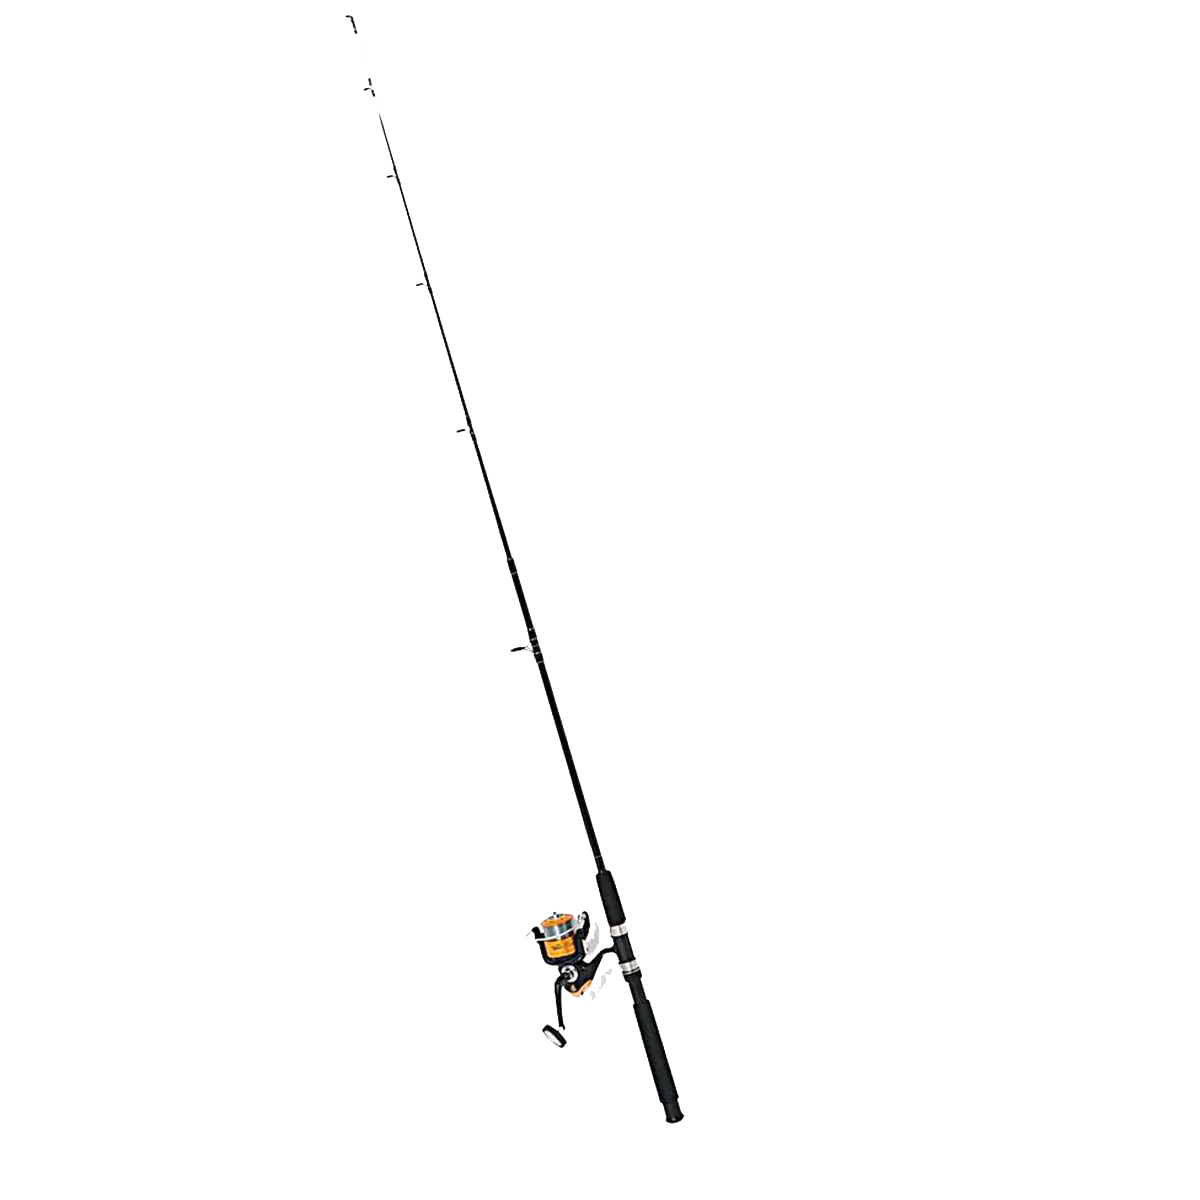 Fishing Pole Png PNG Image